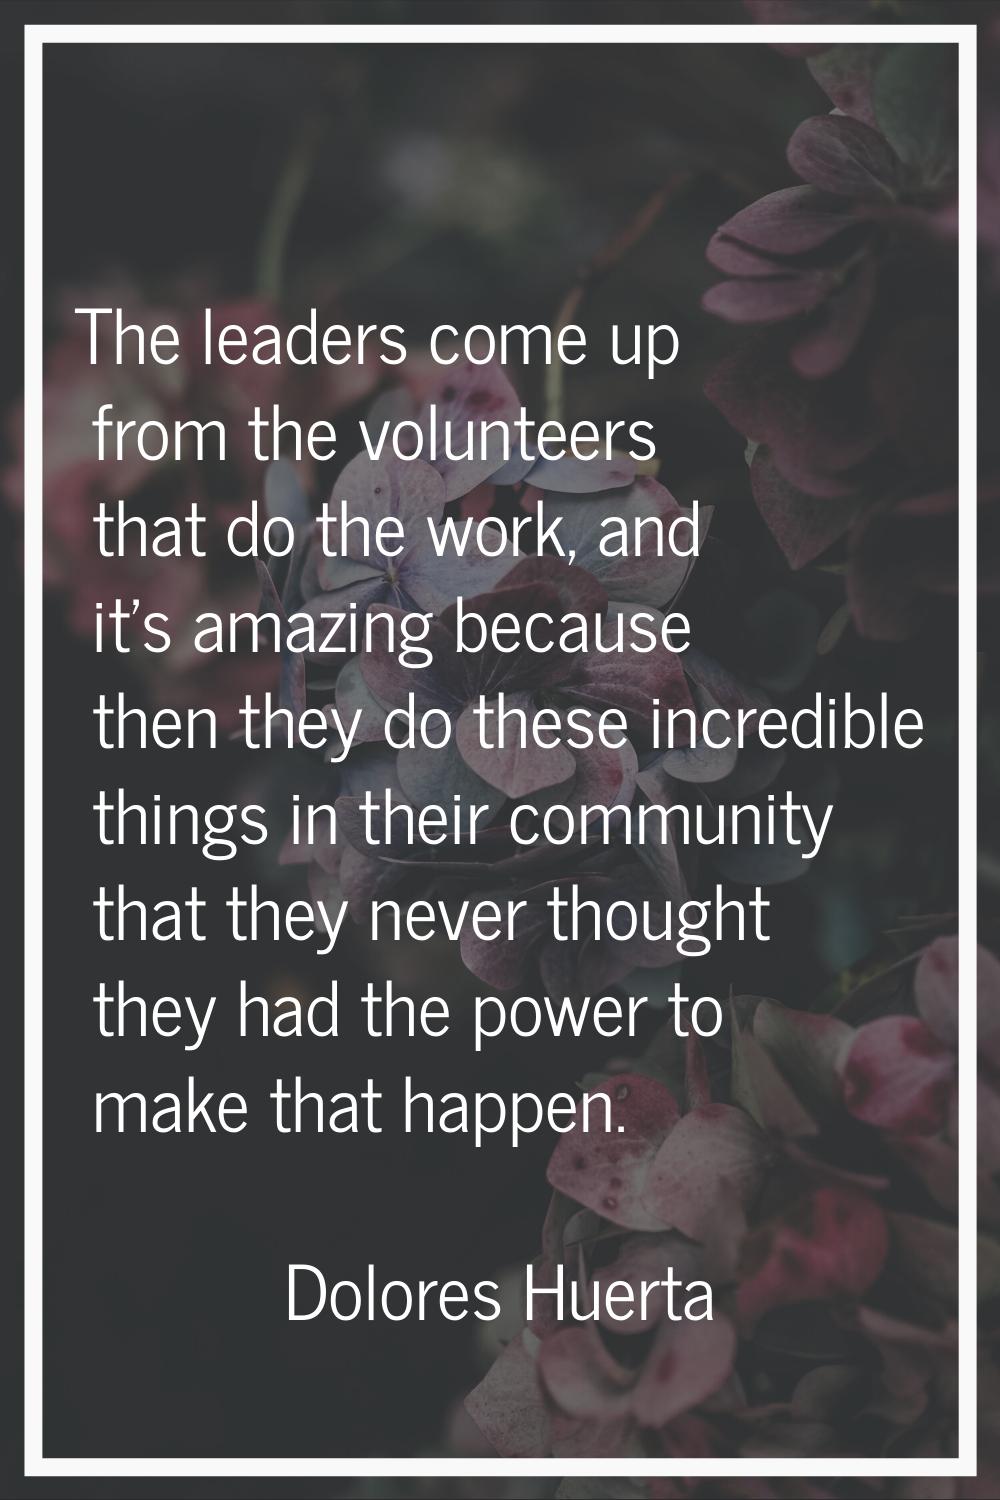 The leaders come up from the volunteers that do the work, and it's amazing because then they do the